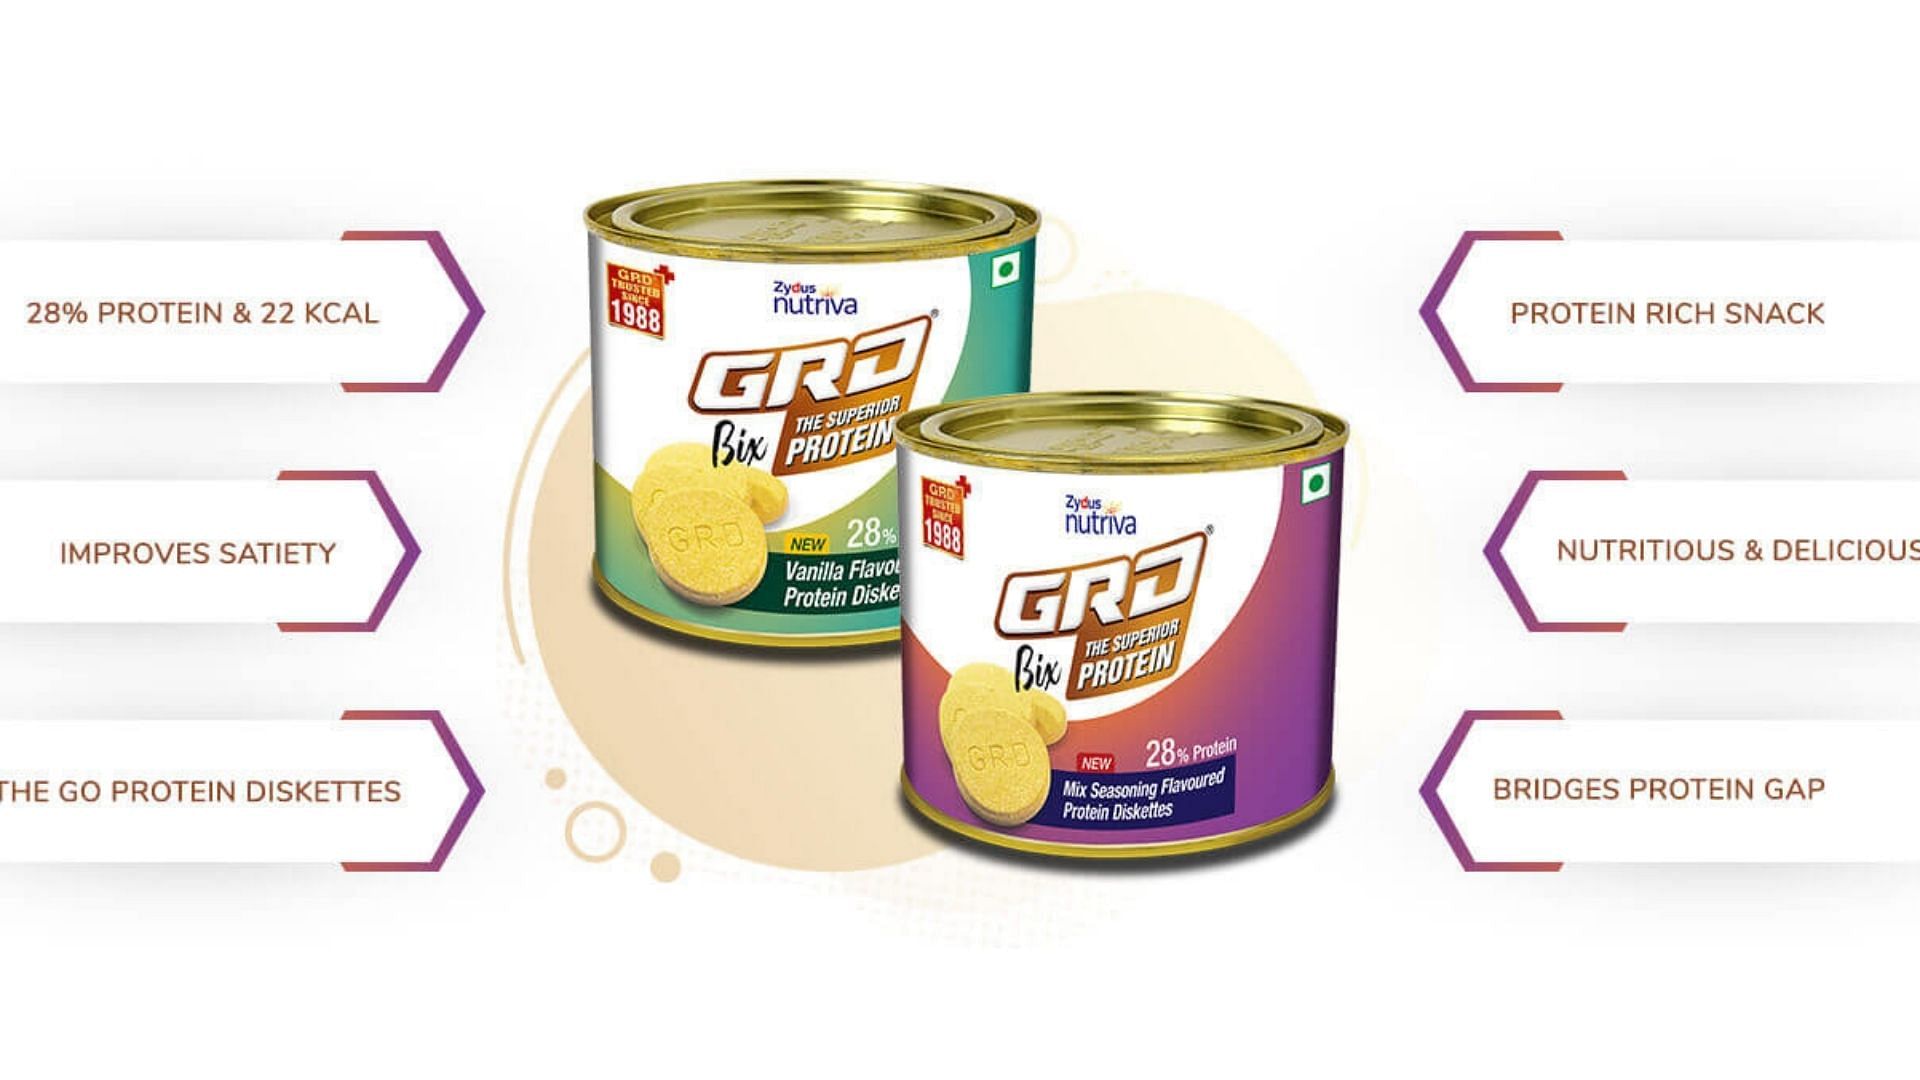 Satiate your cravings the healthy way with GRD Bix